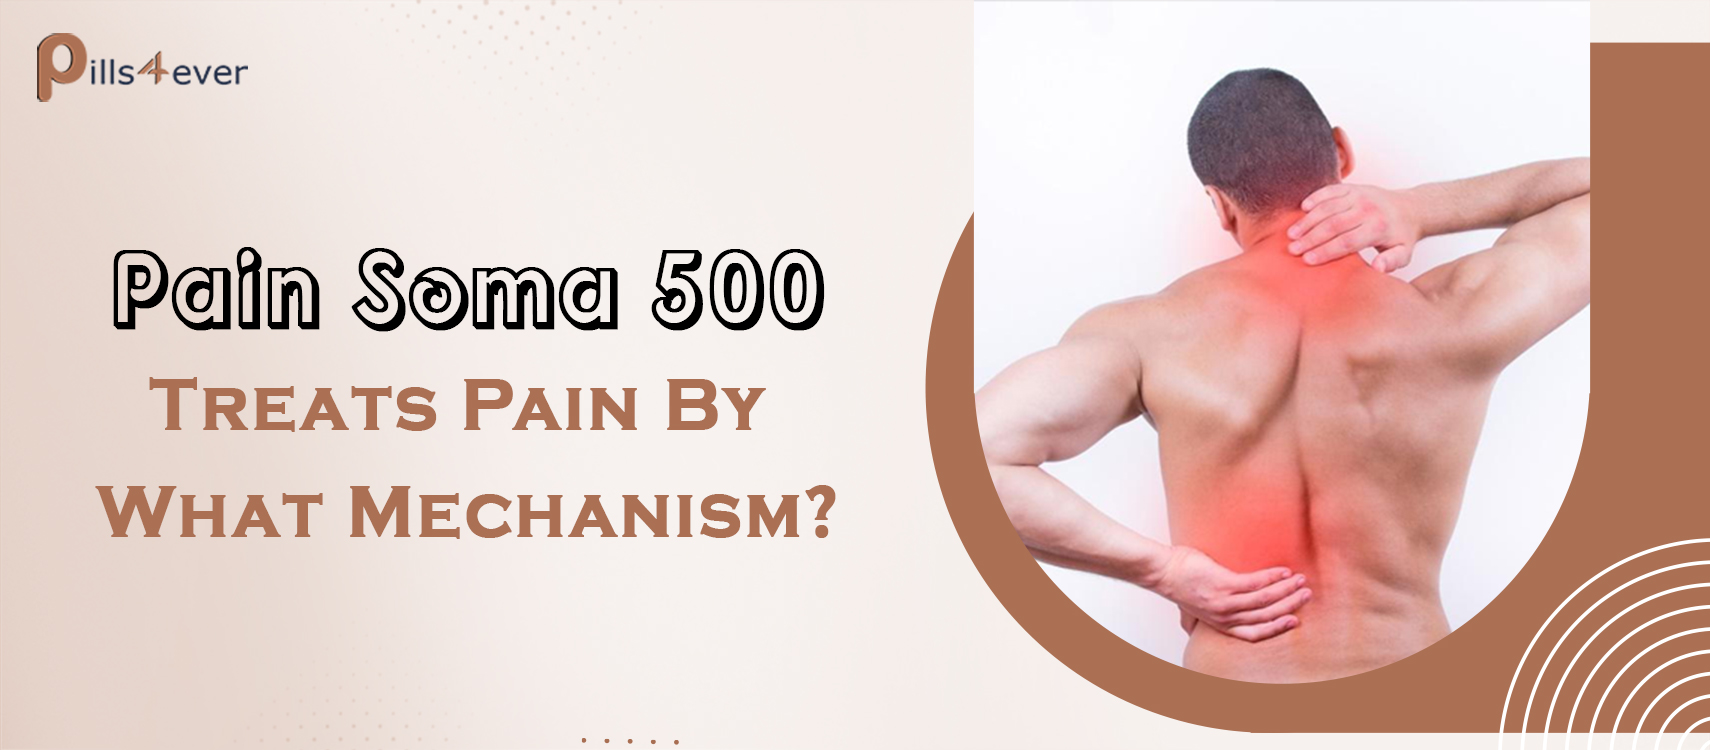 Pain Soma 500 Treats Pain By What Mechanism?